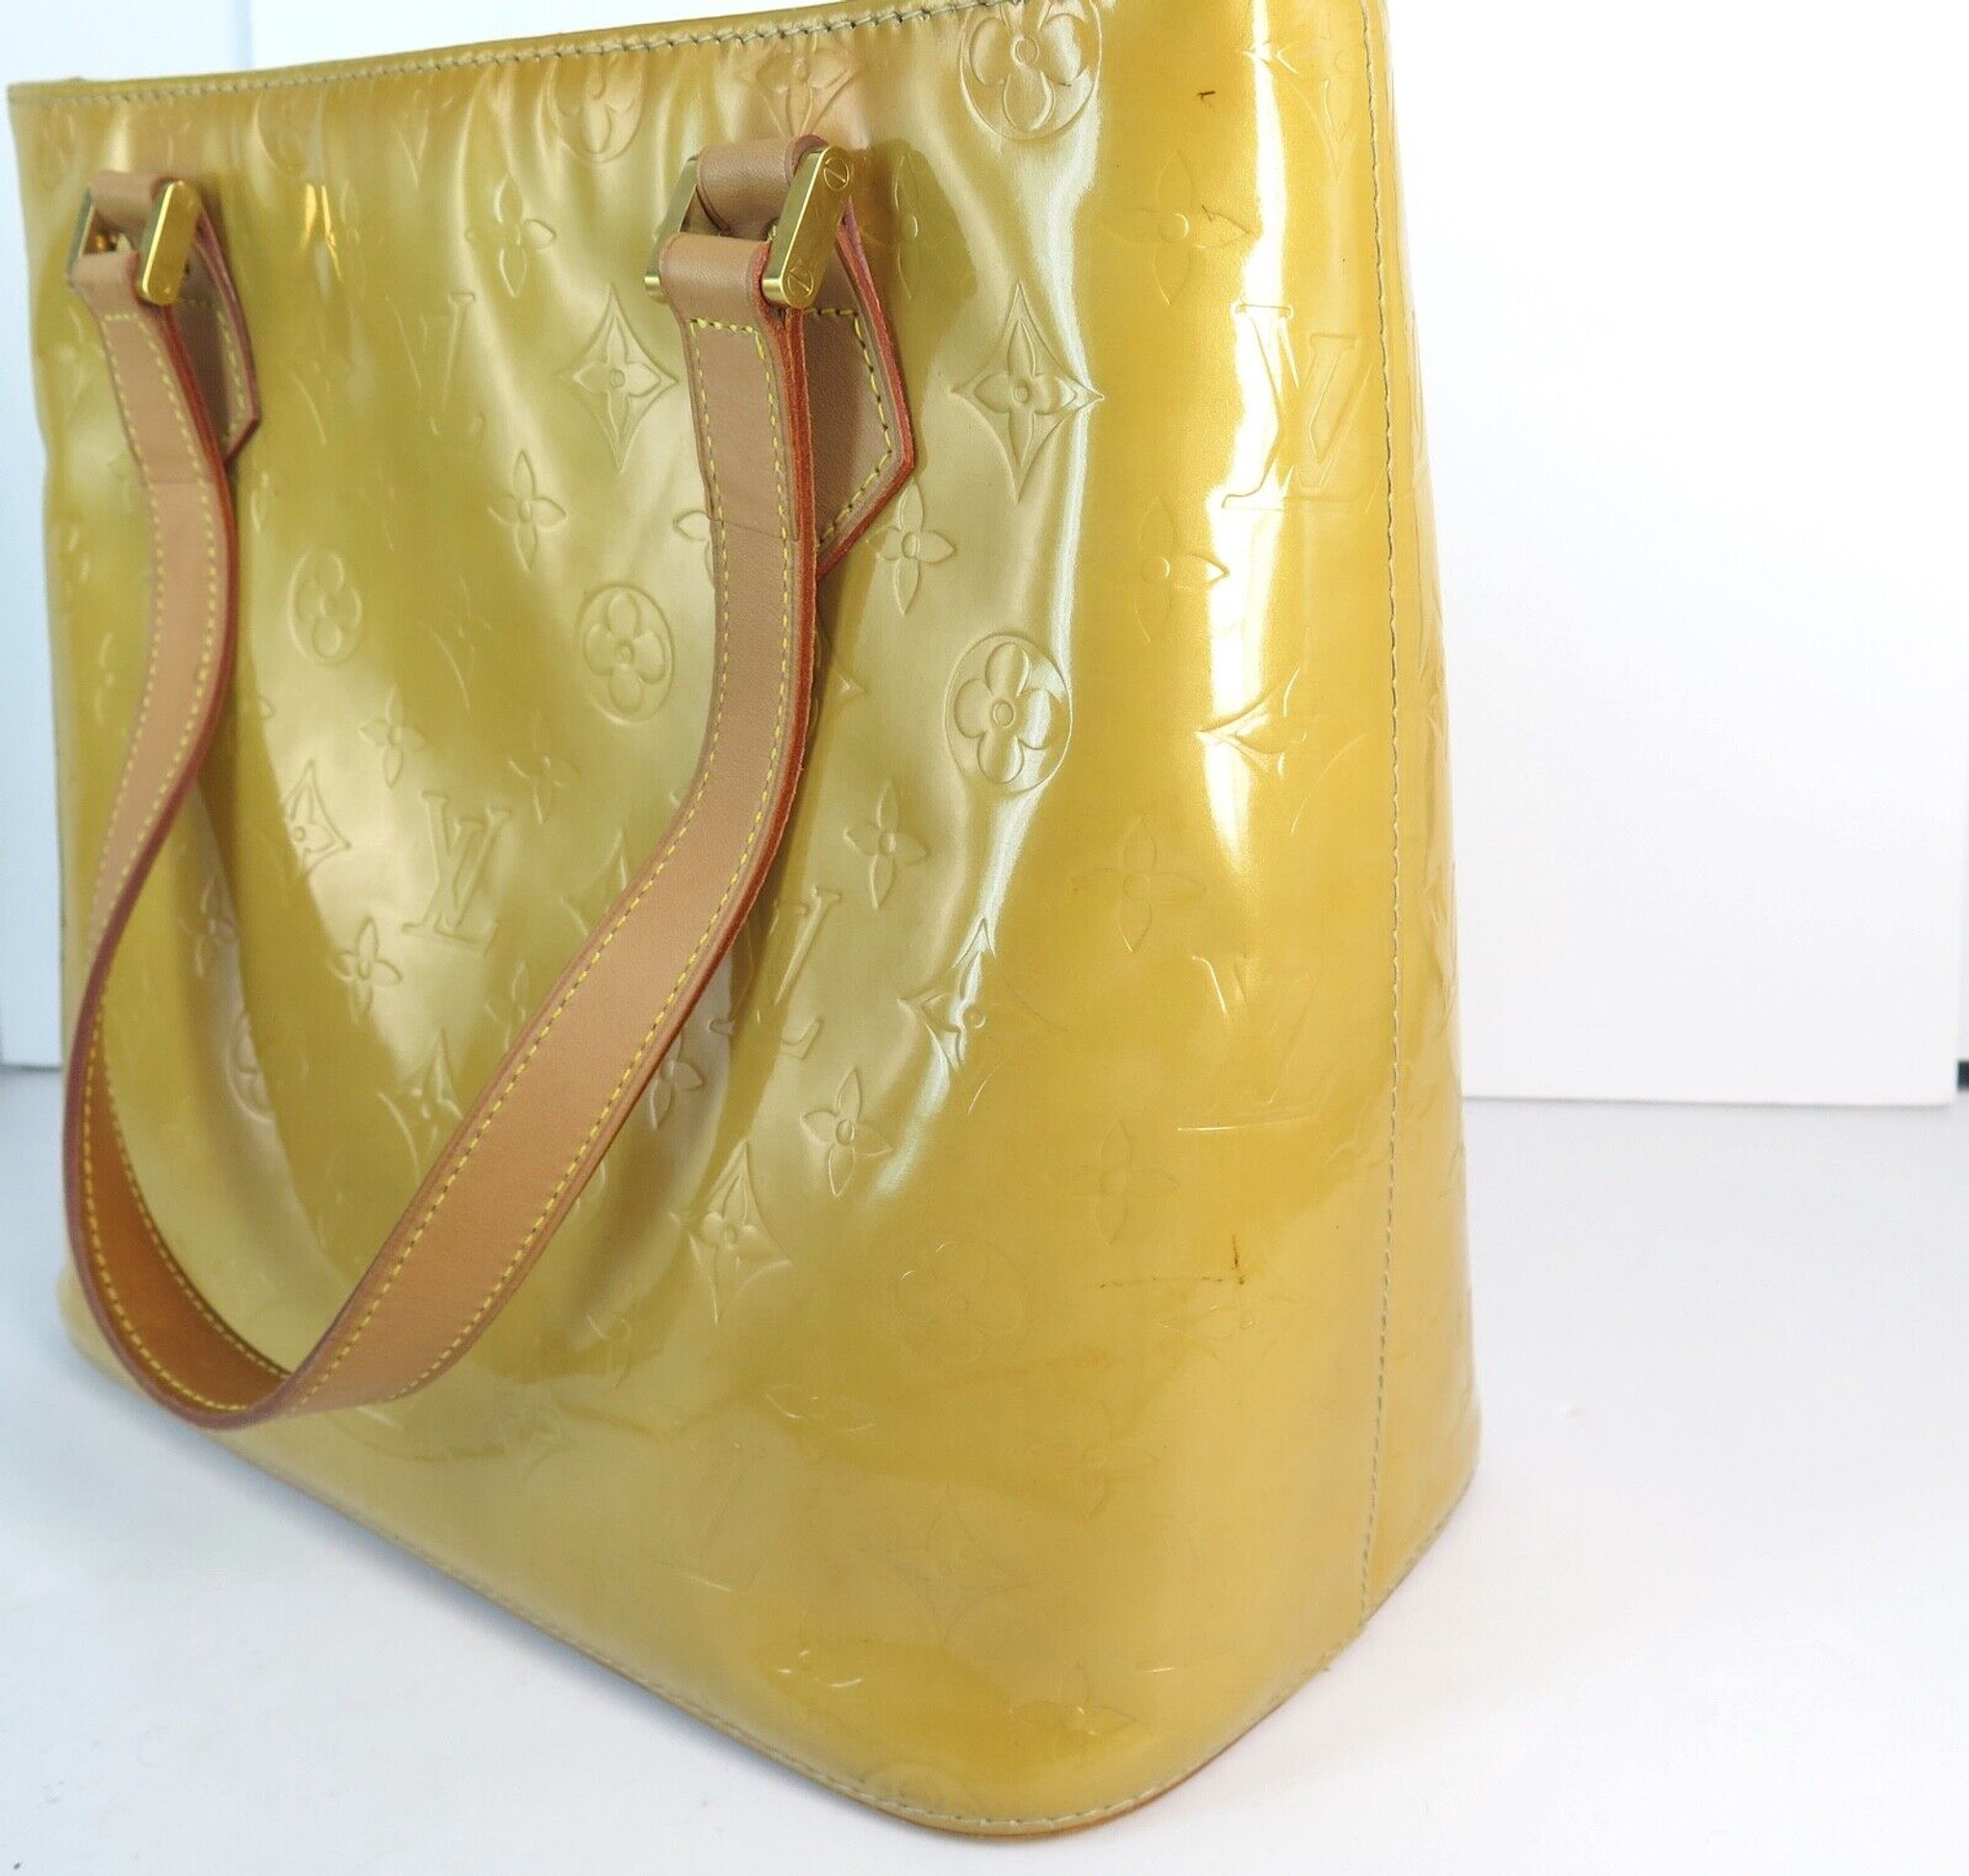 Louis Vuitton, Bags, Louis Vuitton Yellow Vernis Leather Houston Tote Bag  With Dust Bag Pillowcases